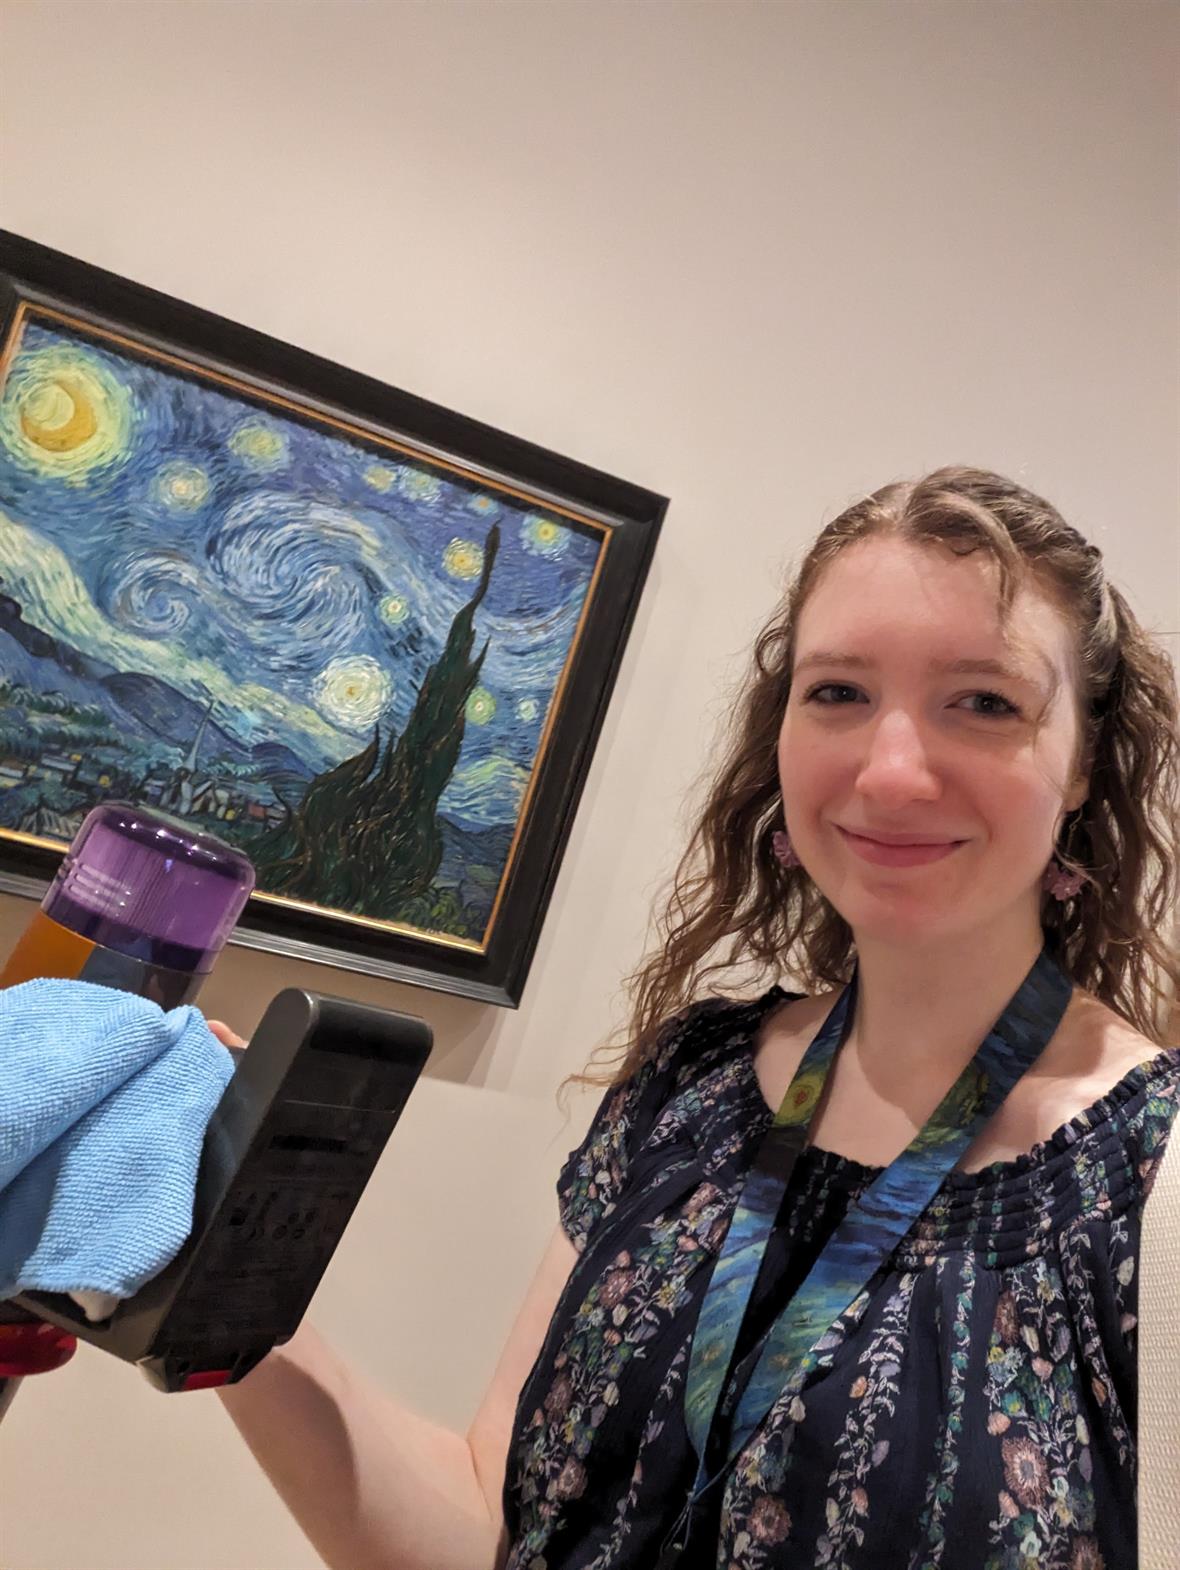 A student stand in front a the Starry Night painting by Van Gogh.